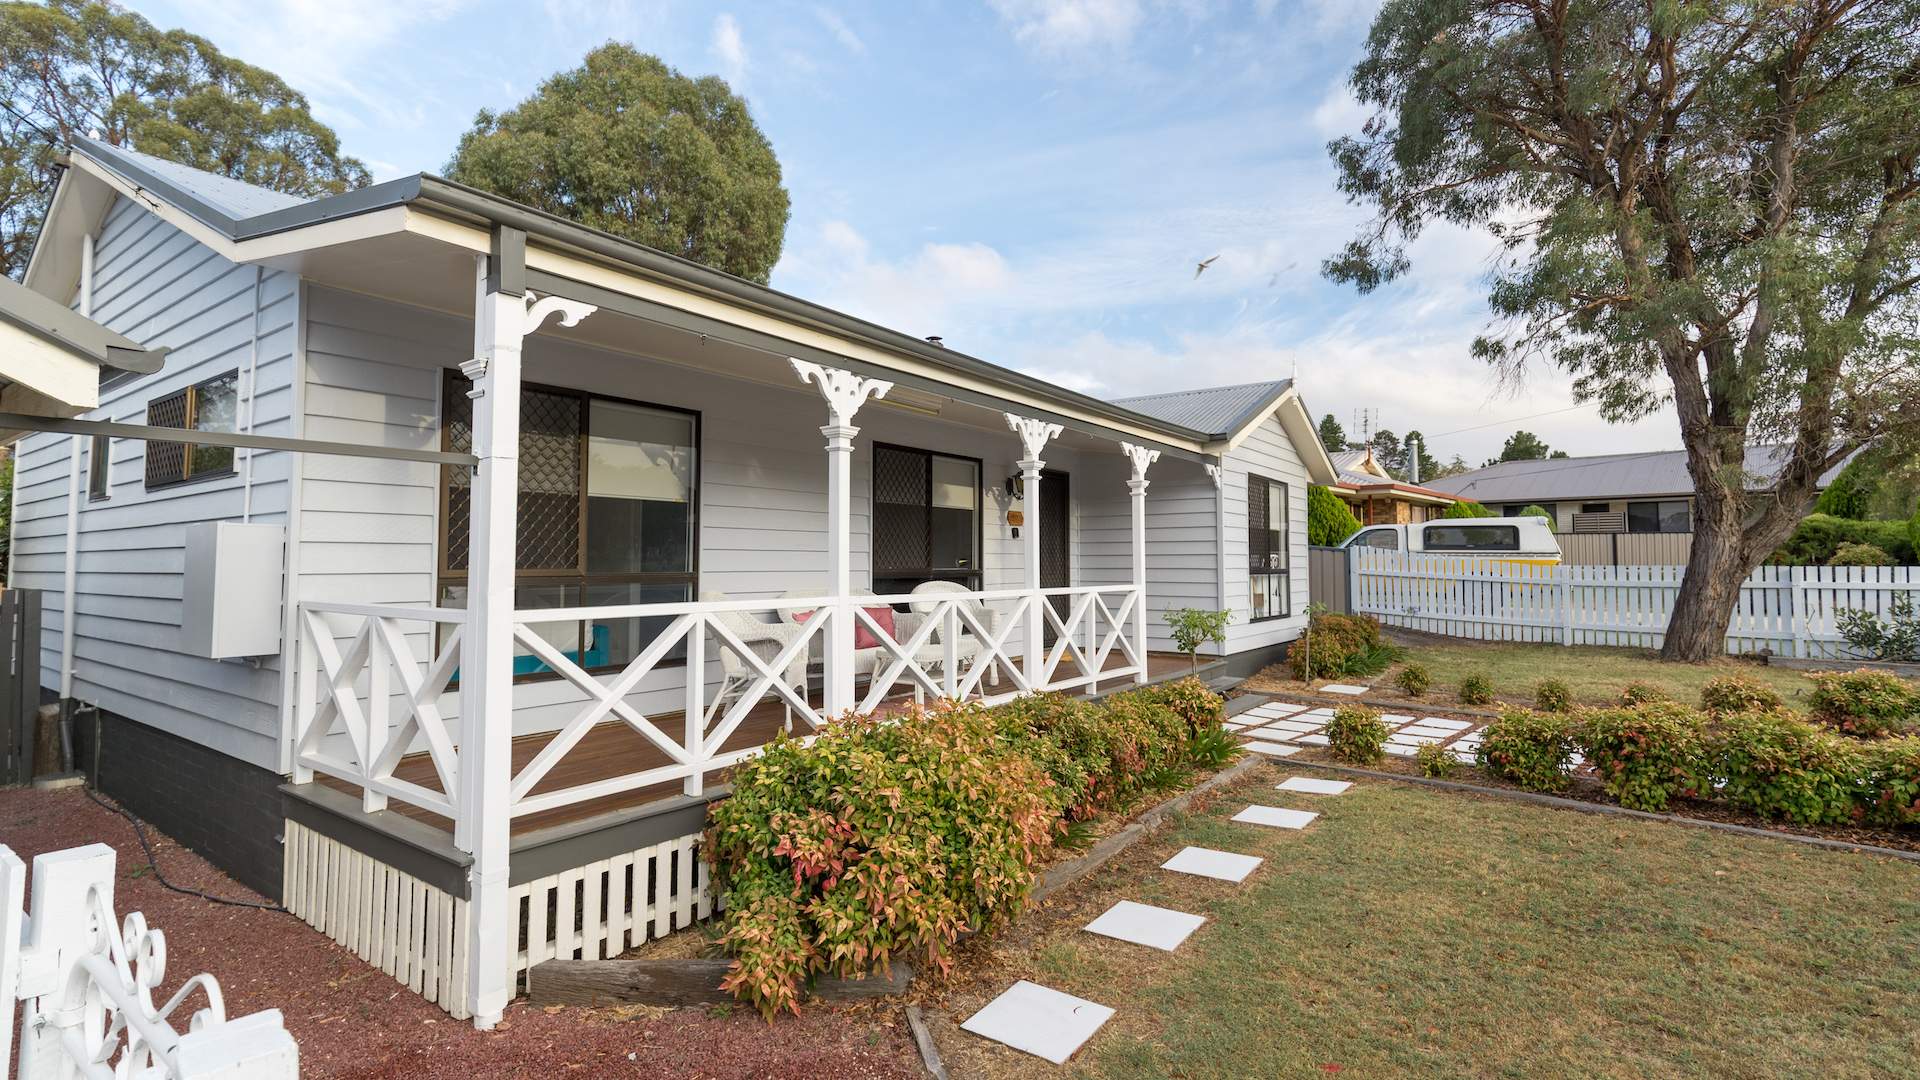 Briar Rose Cottages - Best Dog-Friendly Hotels, B&Bs and Self-Contained Getaways in Queensland